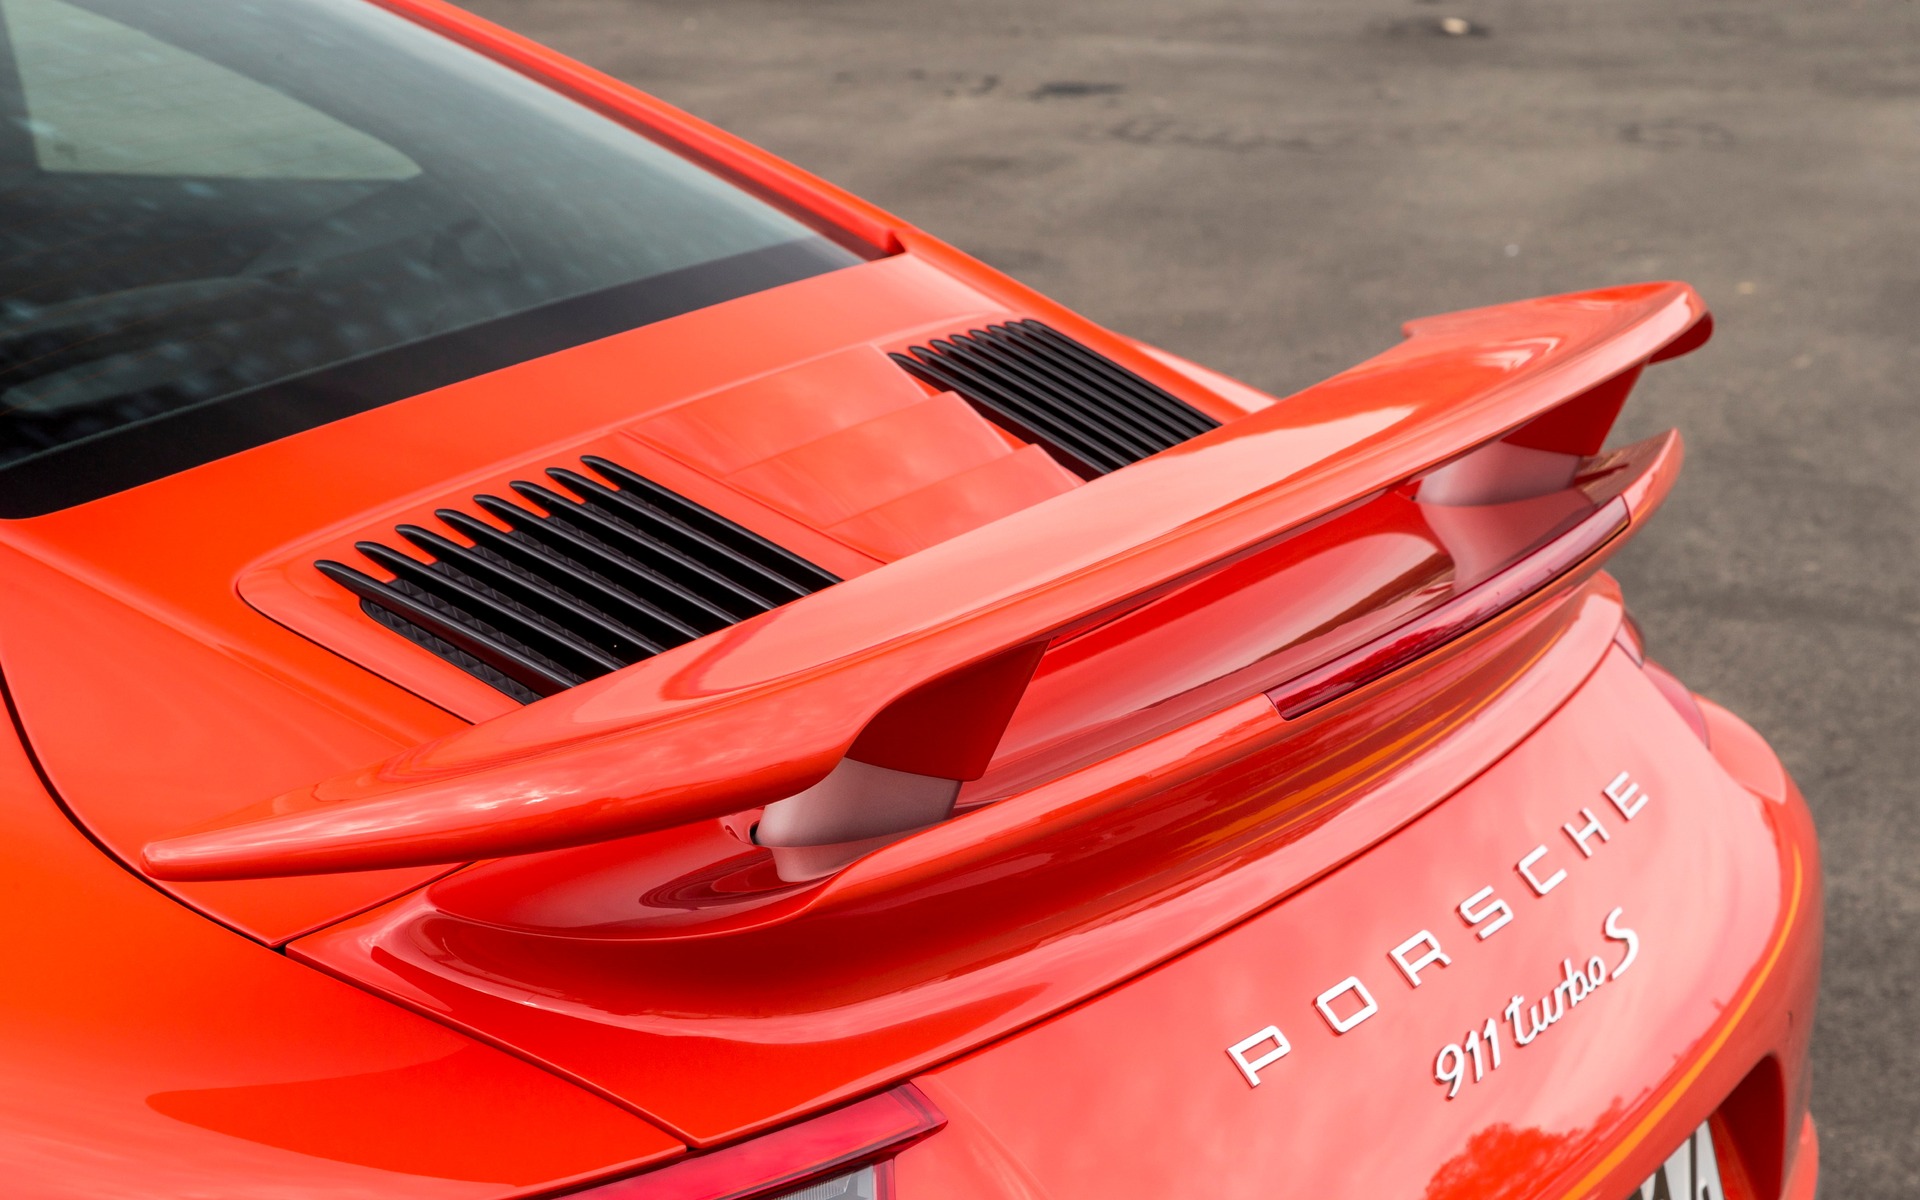 The active rear wing on the 2017 Porsche 911 Turbo S